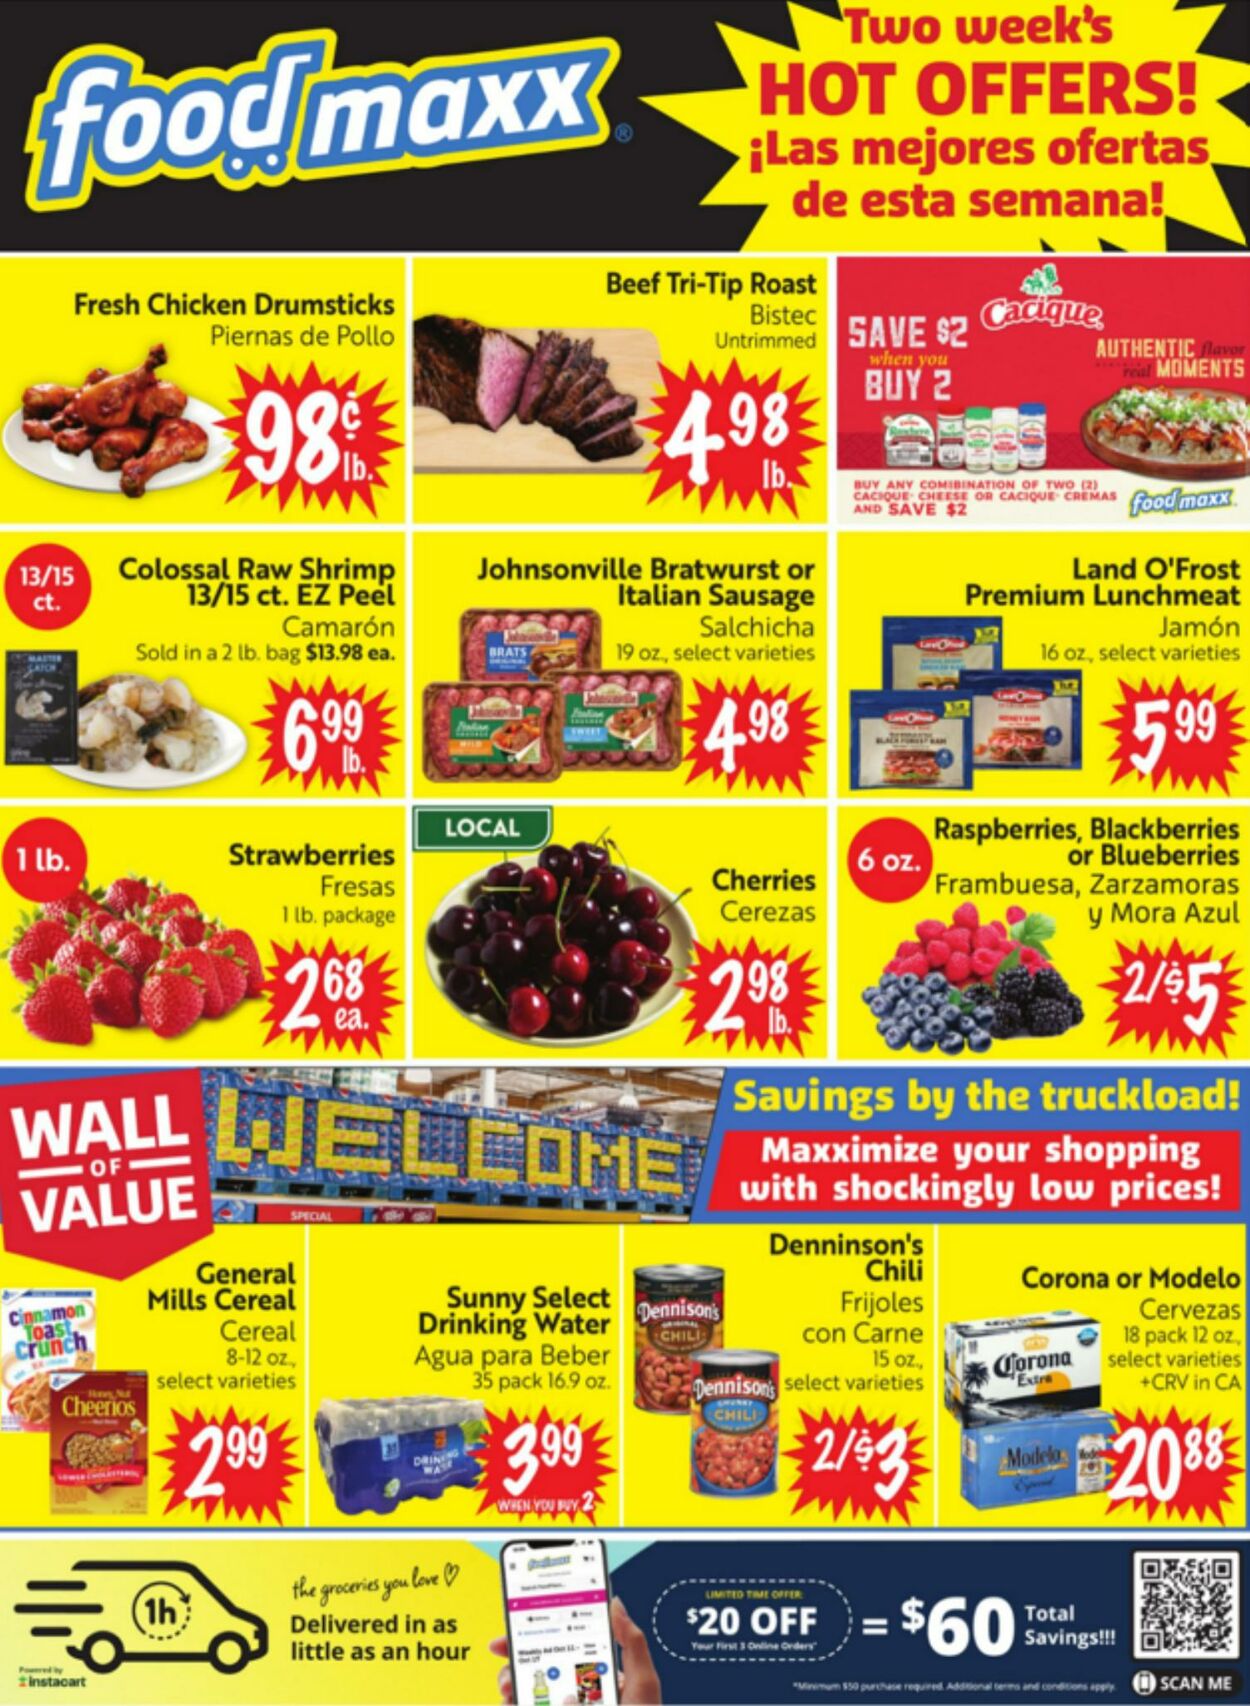 Food Maxx Promotional weekly ads